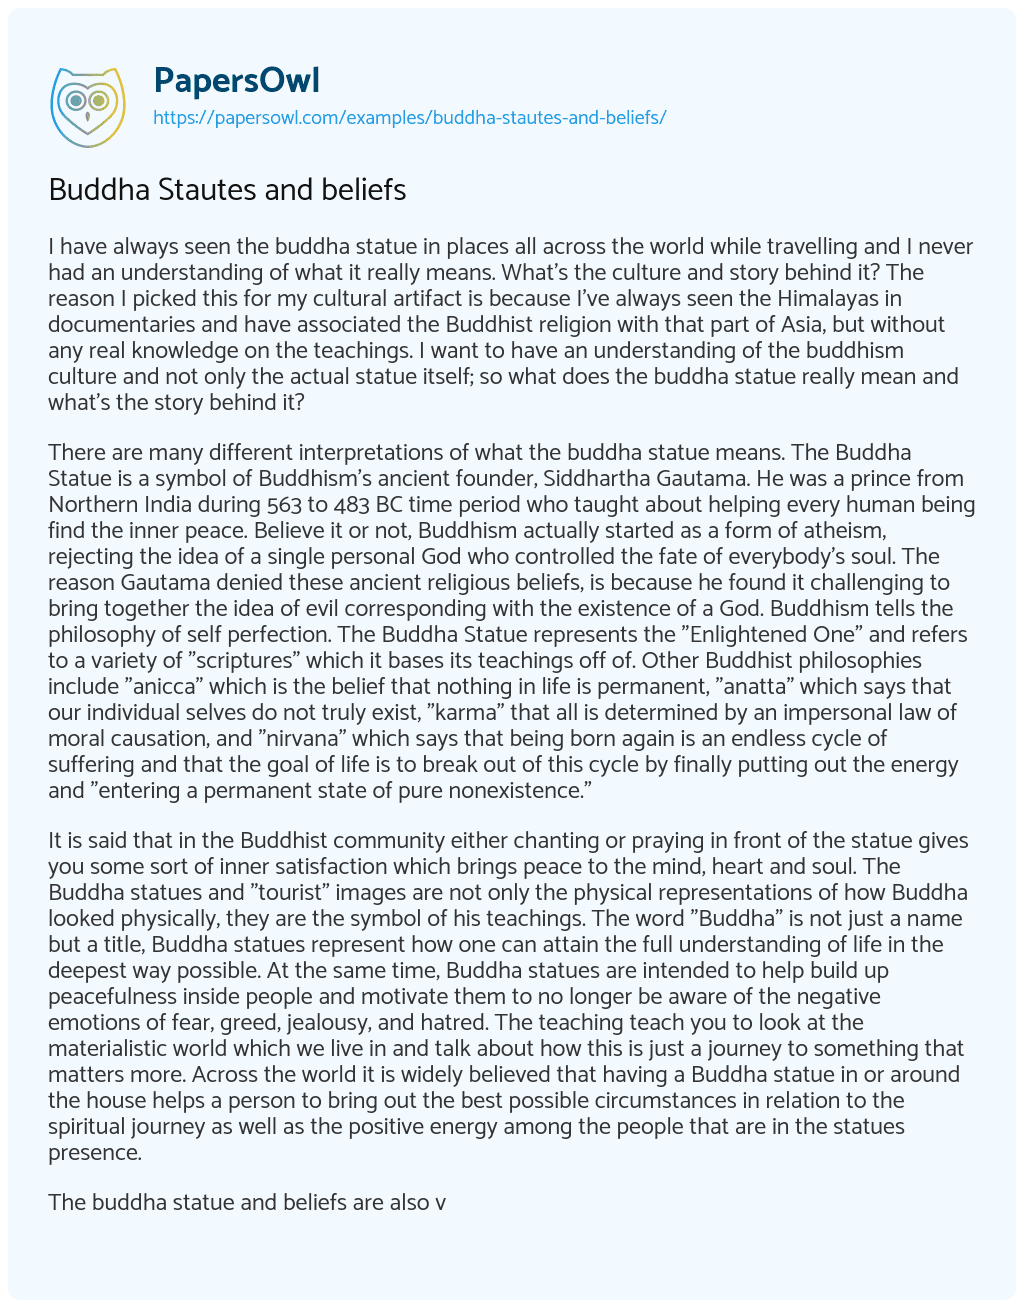 Essay on Buddha Stautes and Beliefs